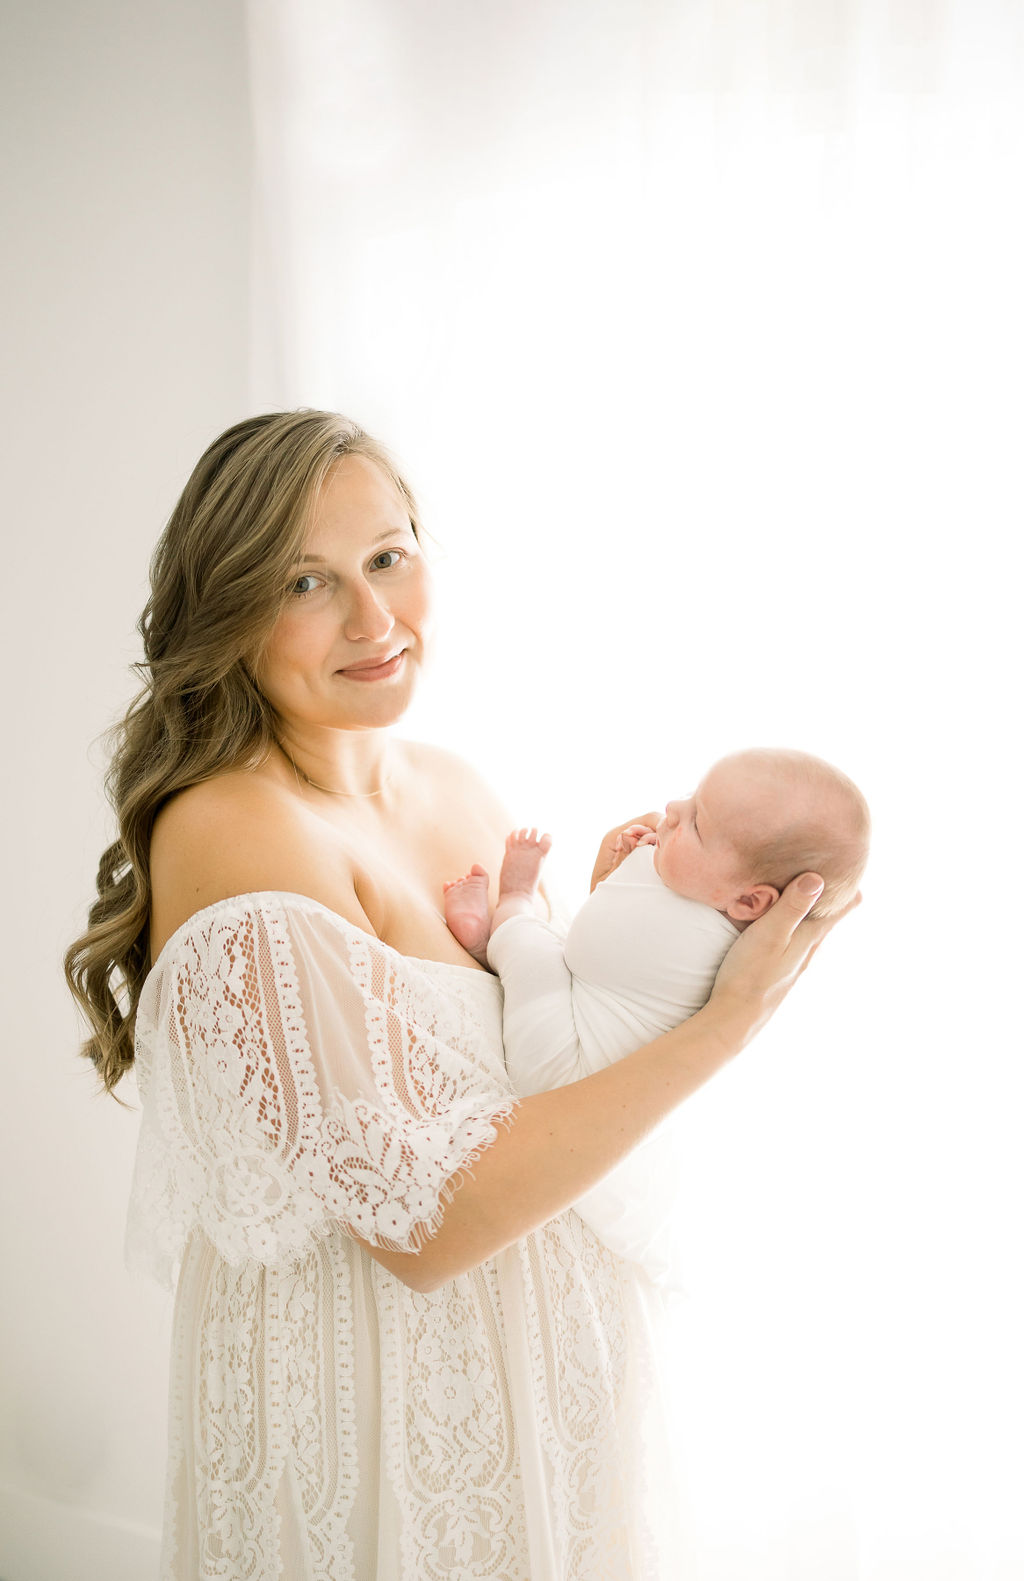 A new mom stands in a window in a studio wearing a white lace gown with her newborn baby in her arms nj birth center